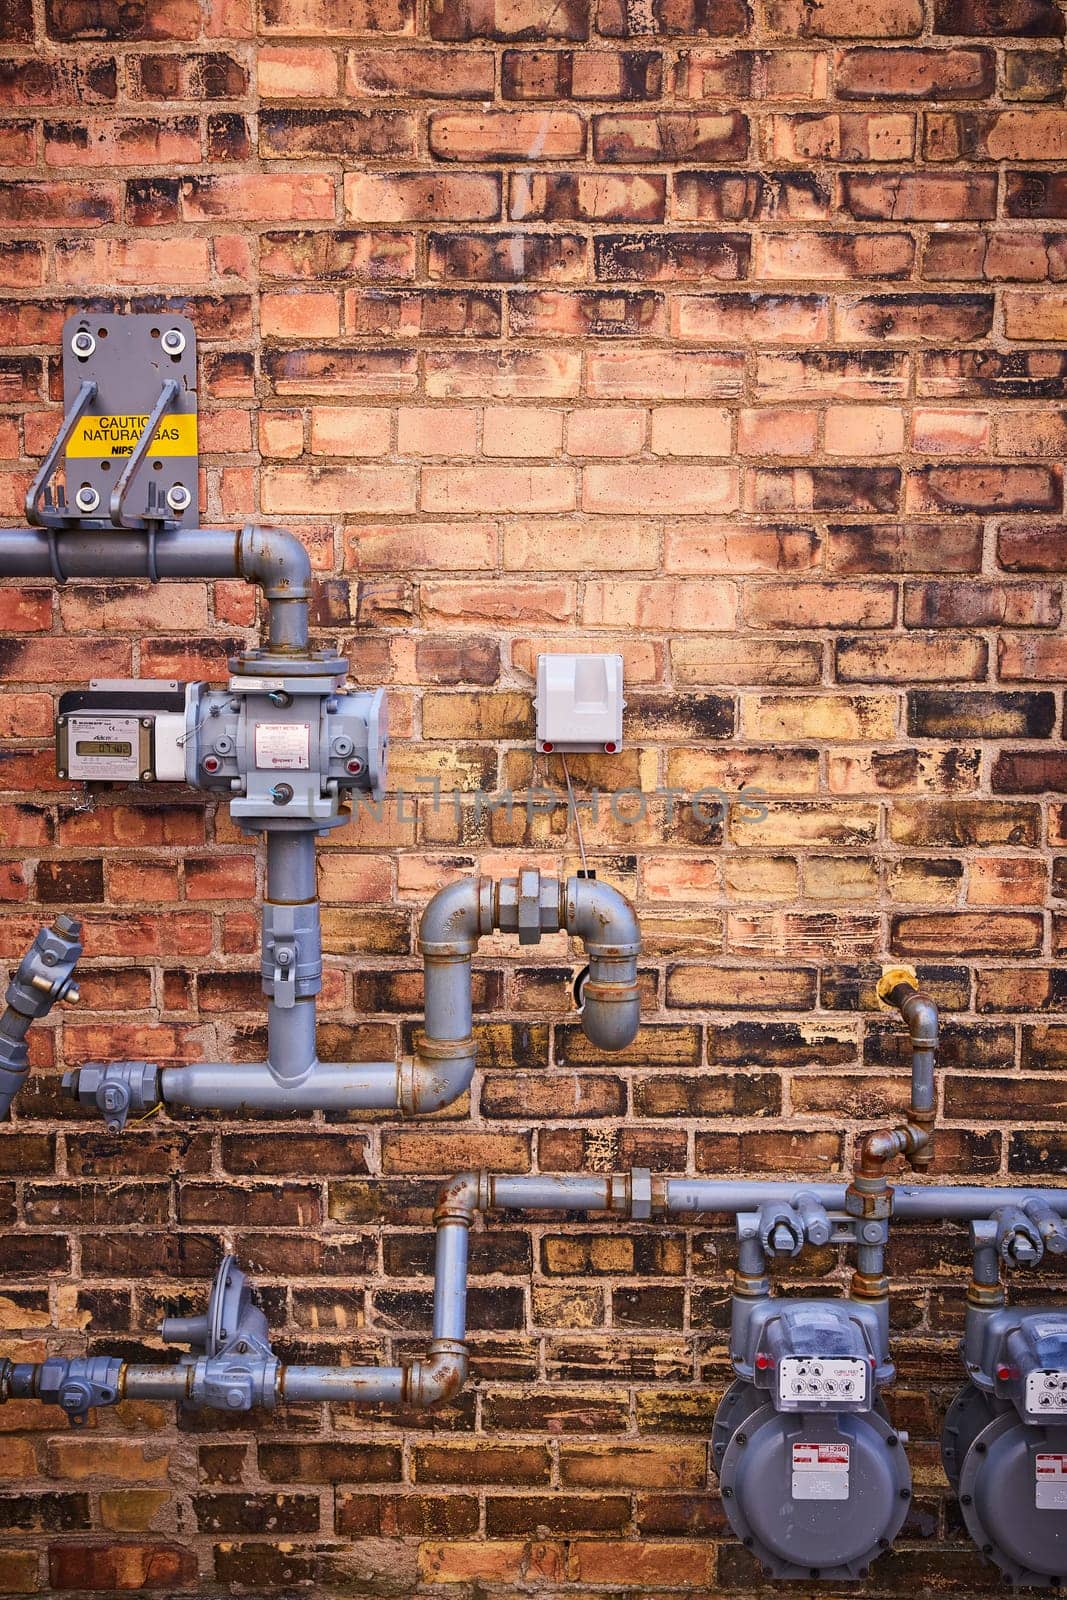 Intricate gas meters and pipes on a weathered brick wall, showcasing urban infrastructure in Fort Wayne.